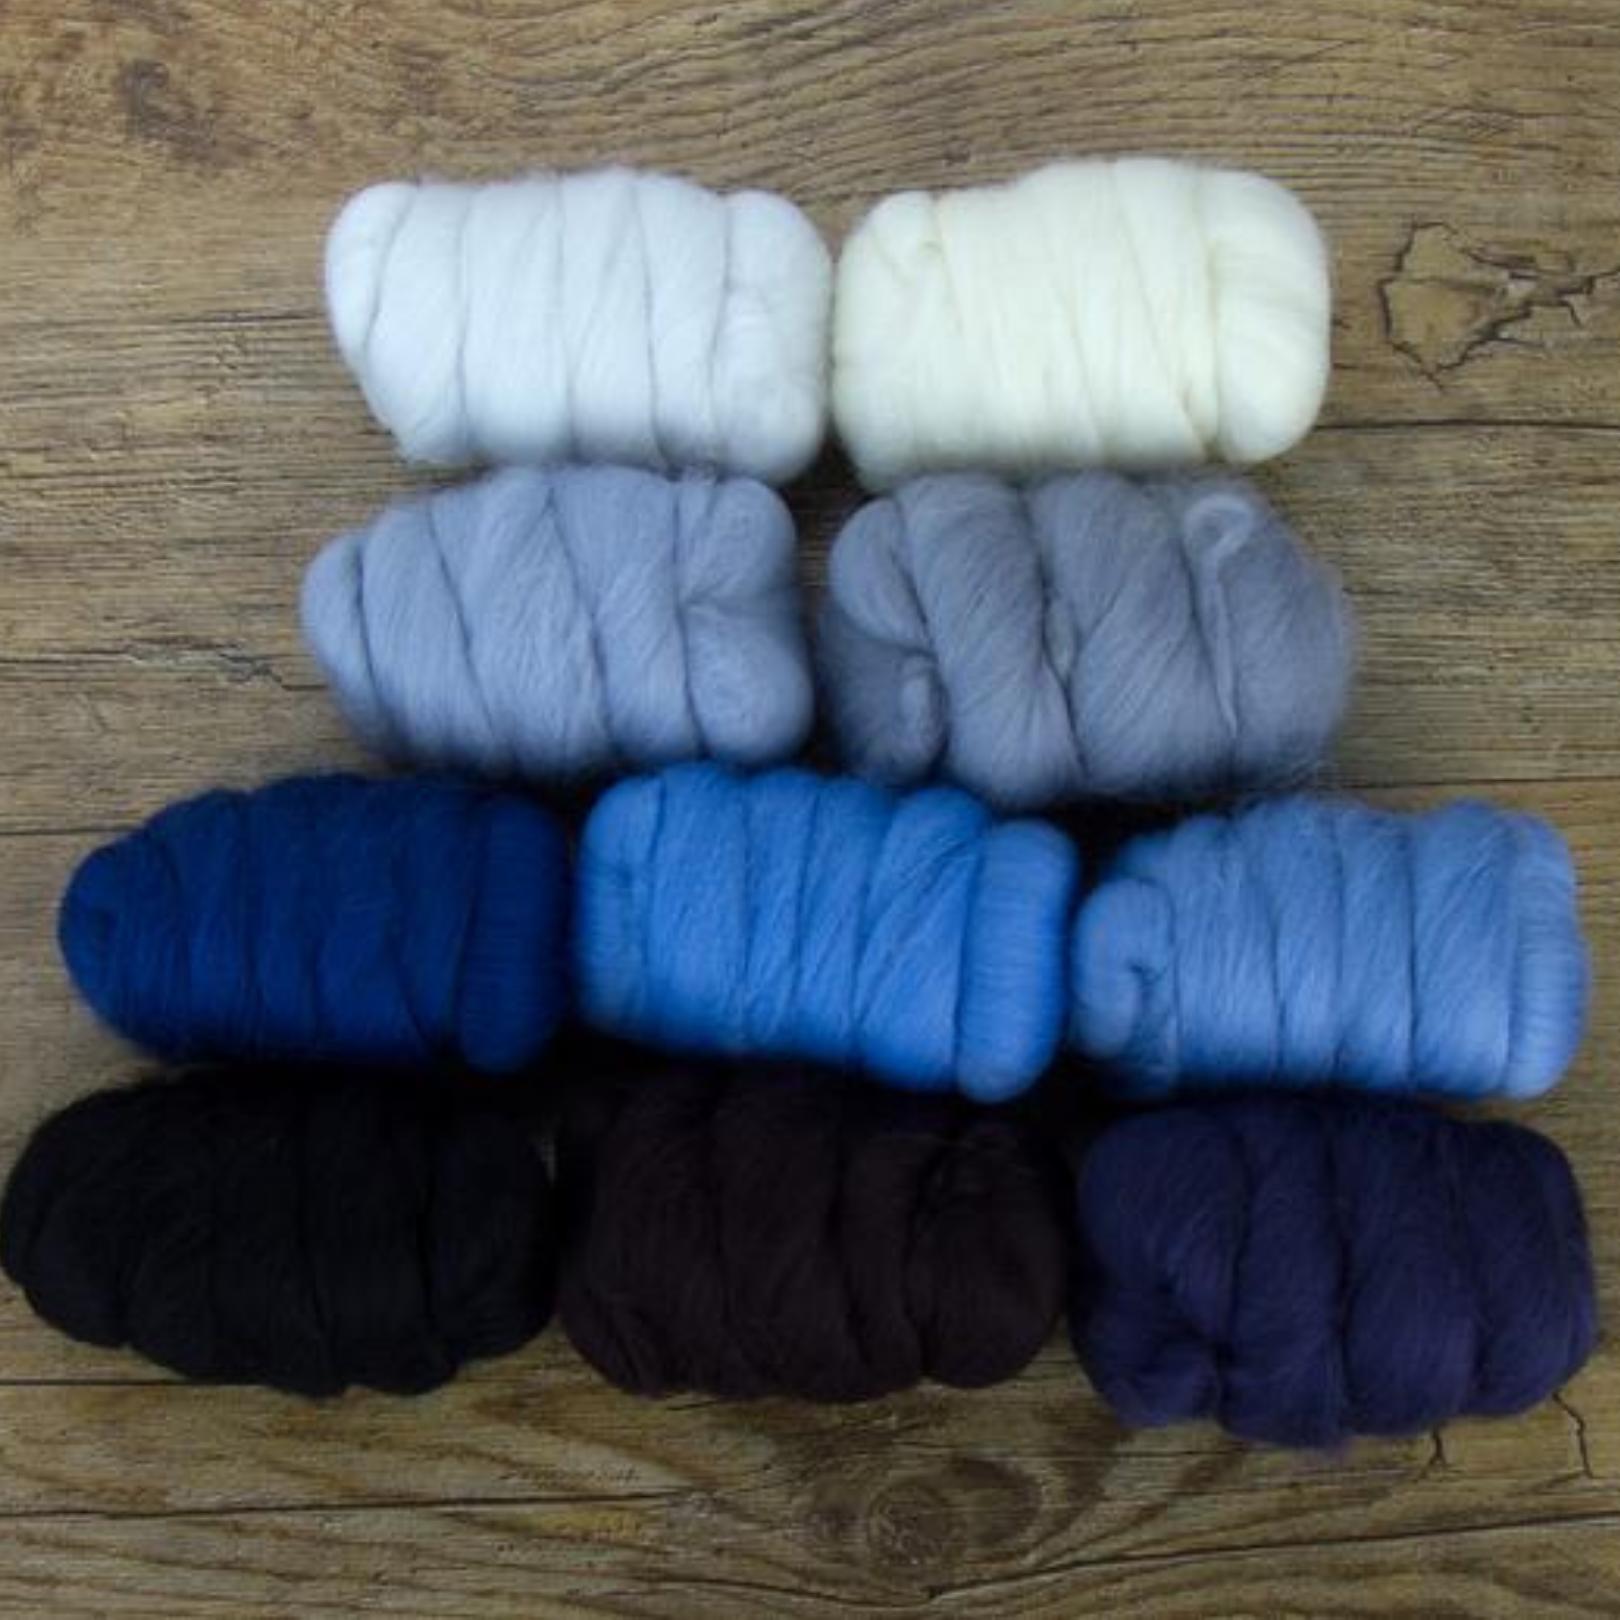 Mixed Merino Wool Variety Pack | Glacier Chill (Multicolored) 250 Grams, 23 Micron - Textile Indie 